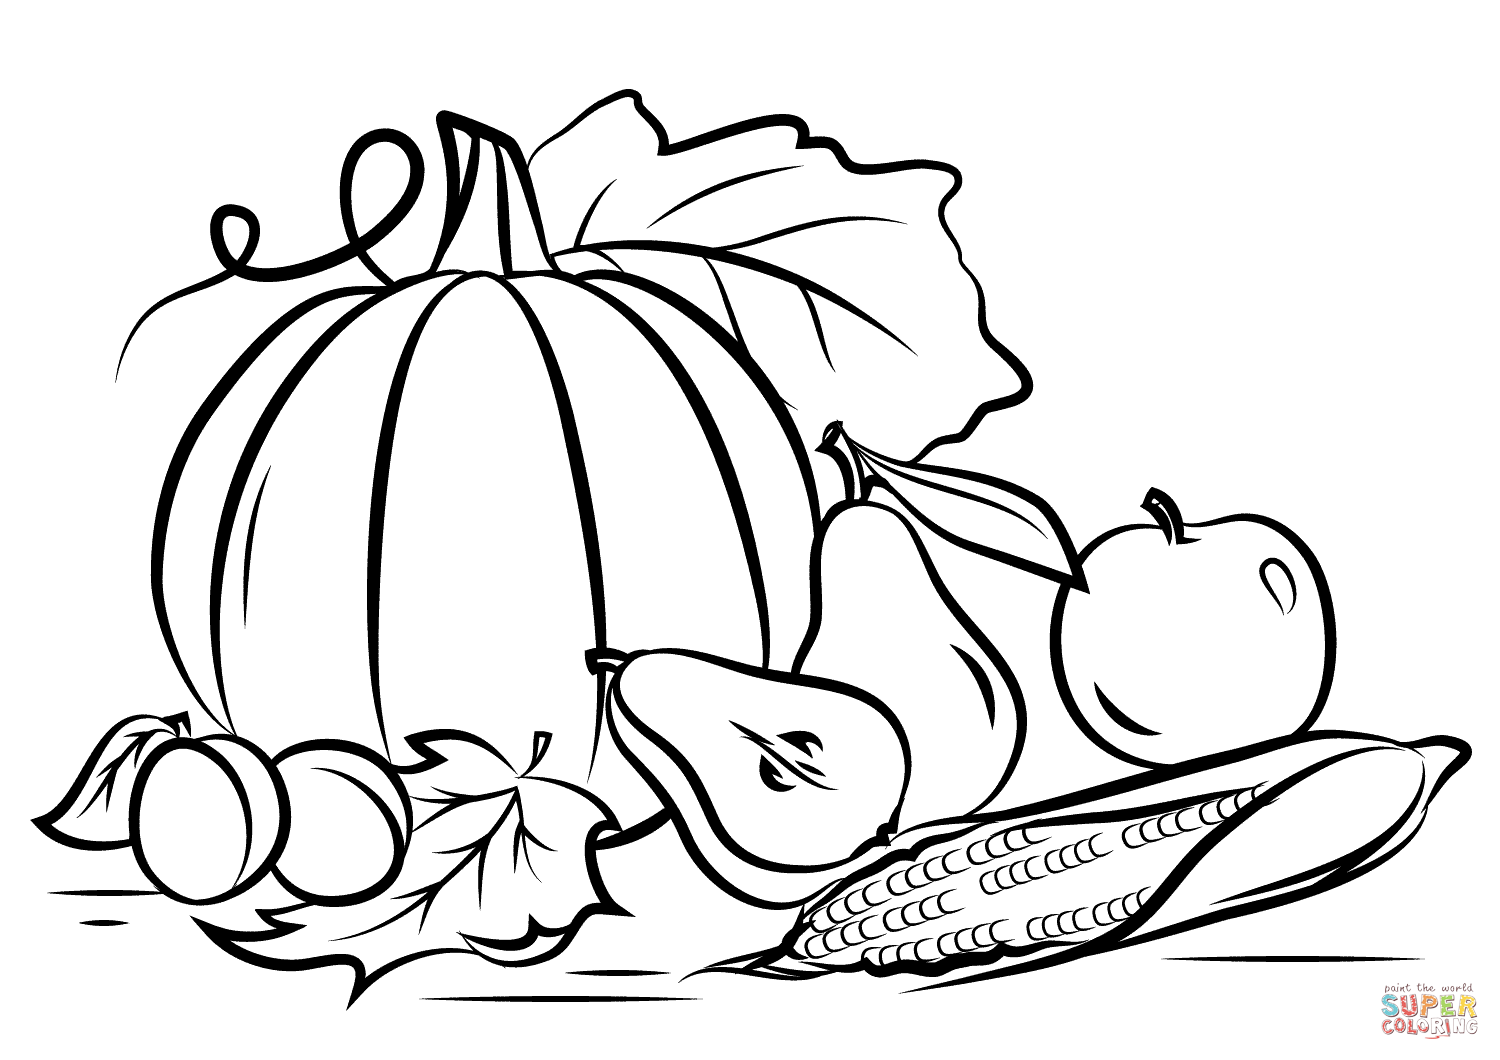 Autumn harvest coloring page free printable coloring pages